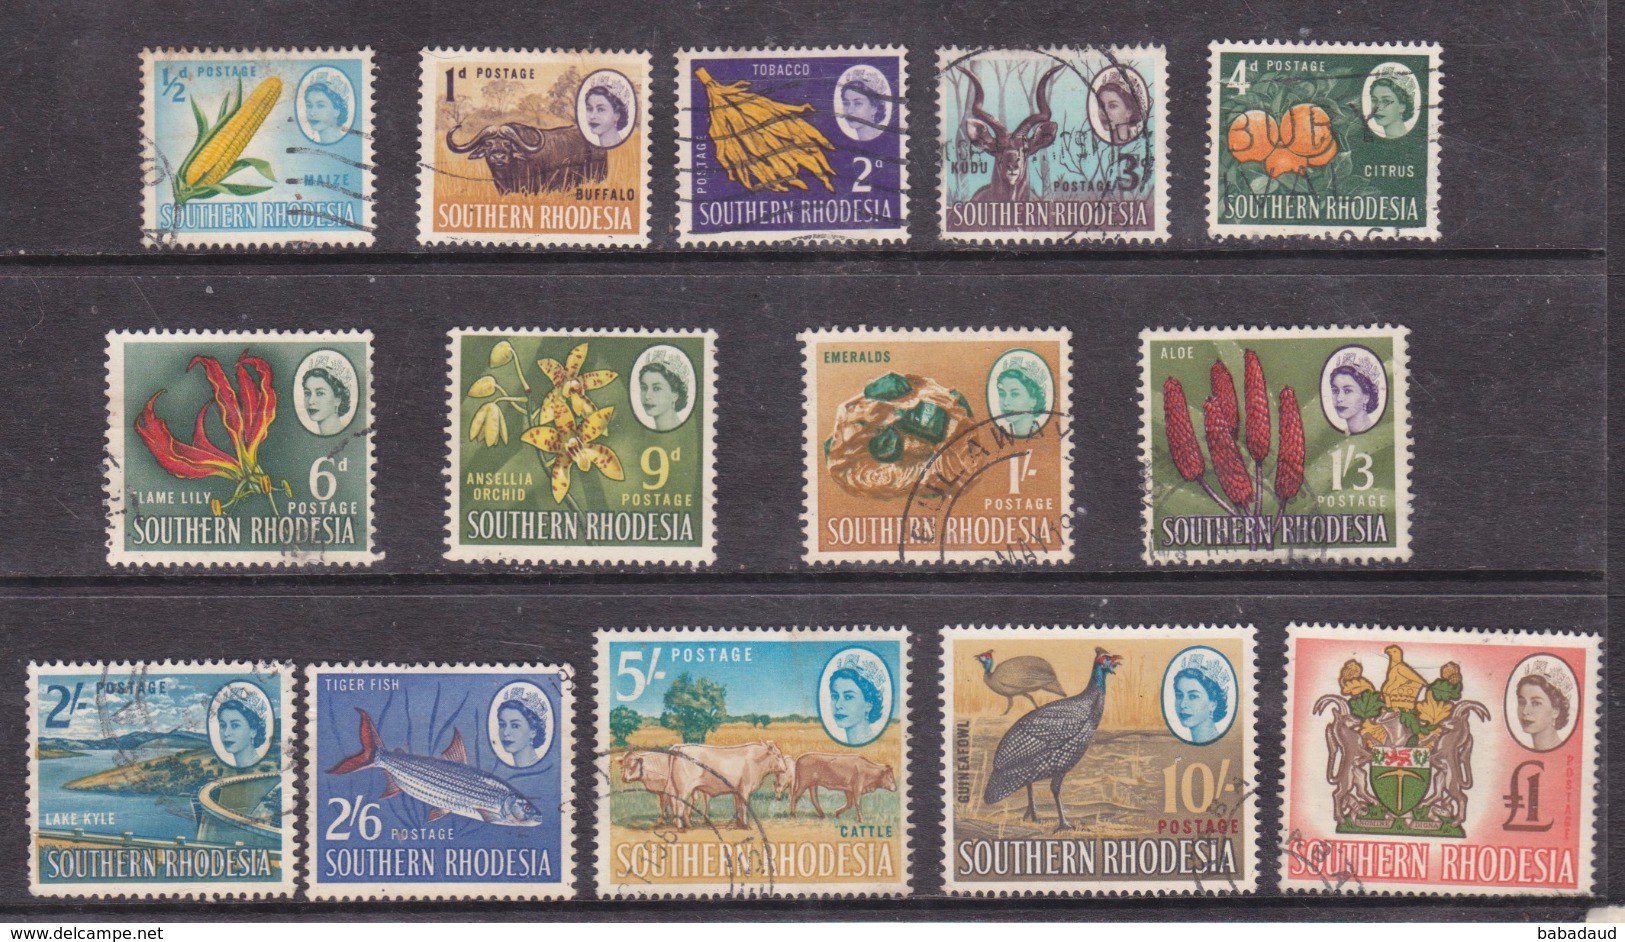 Southern Rhodesia 1964 1/2d - £1, Used - Southern Rhodesia (...-1964)